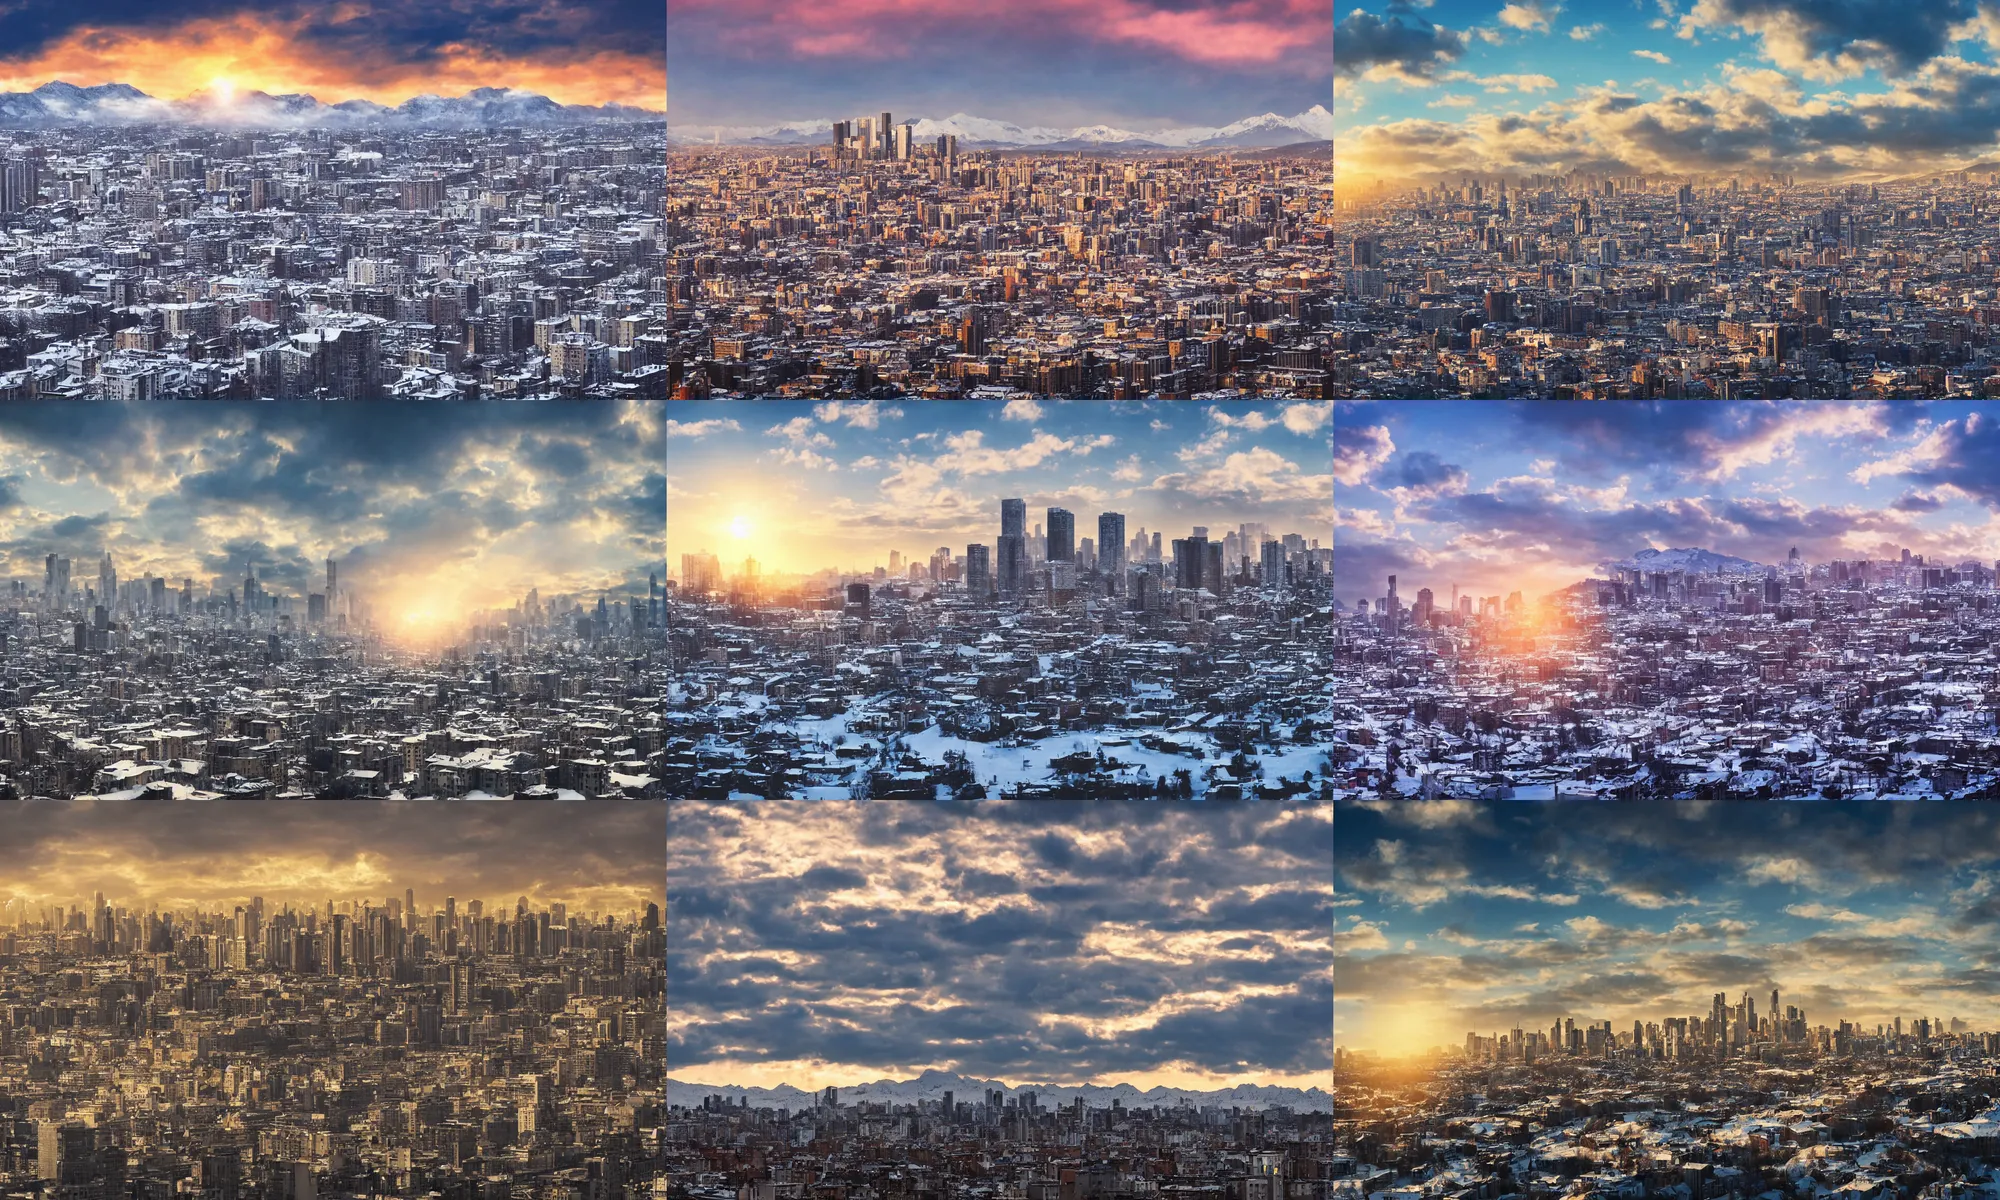 Prompt: City view, high rises with snowy hills in the background, photograph, photorealism, atmospheric light, clouds, sunset time